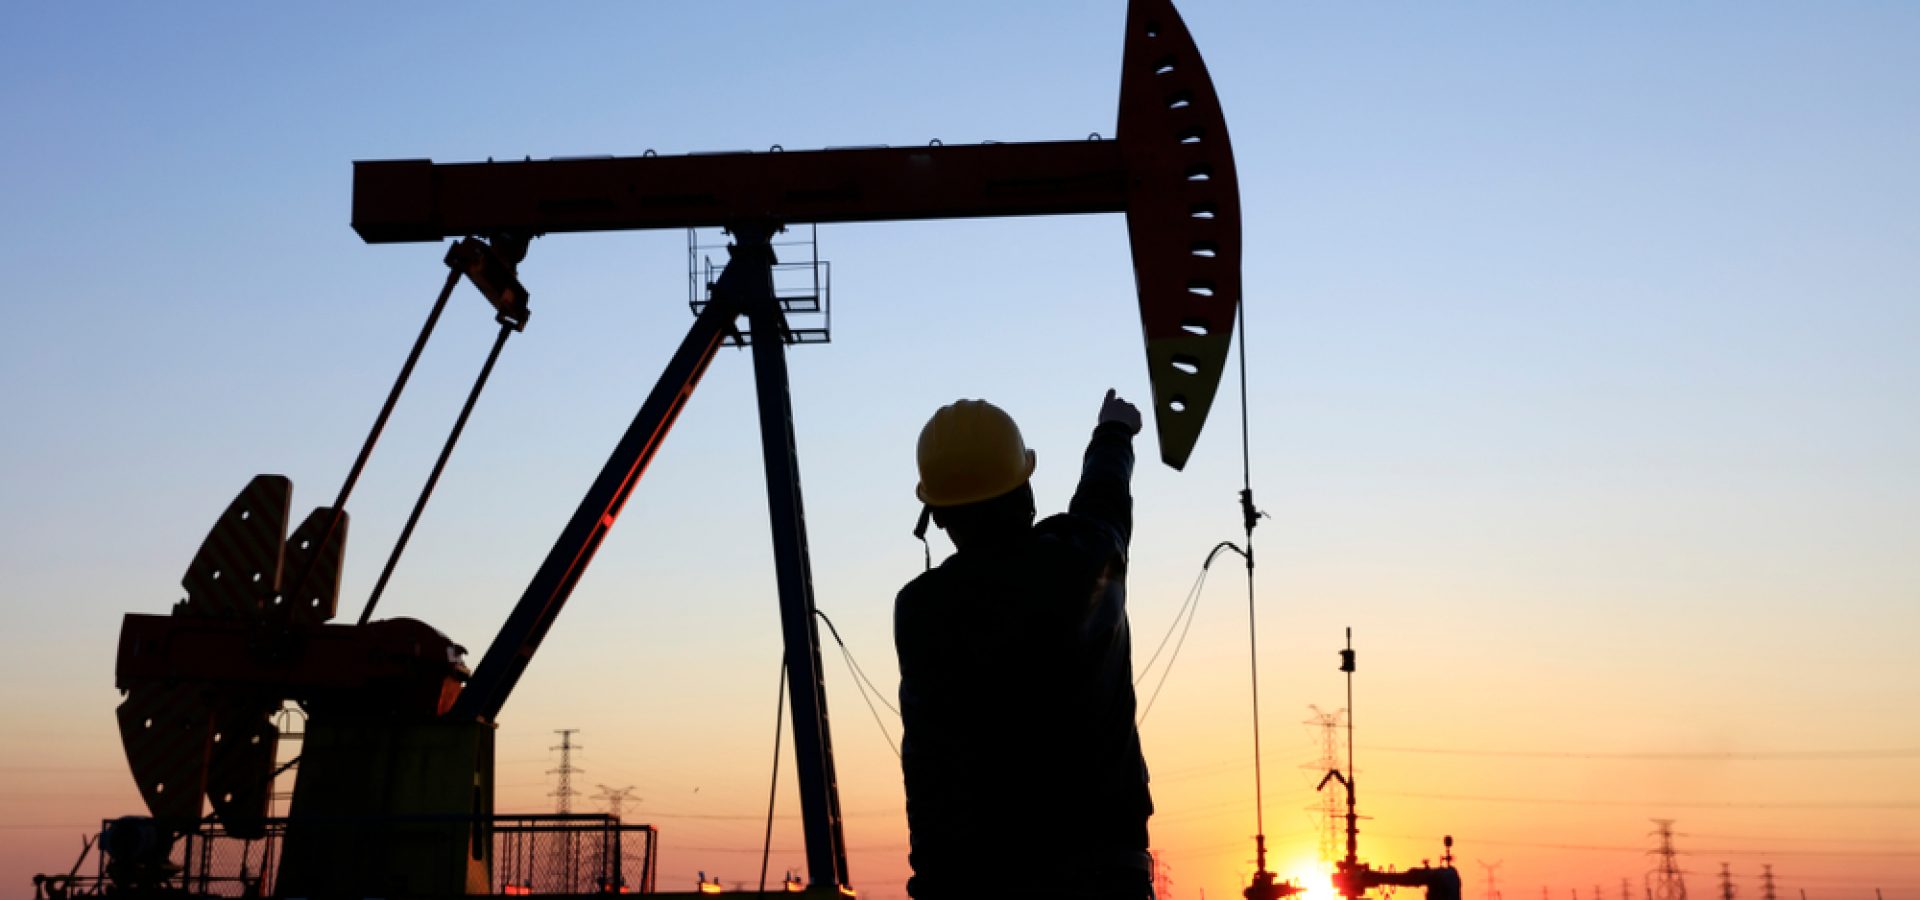 Wibest – Oil and Petroleum: A worker and an oil pump jack over the sunset.